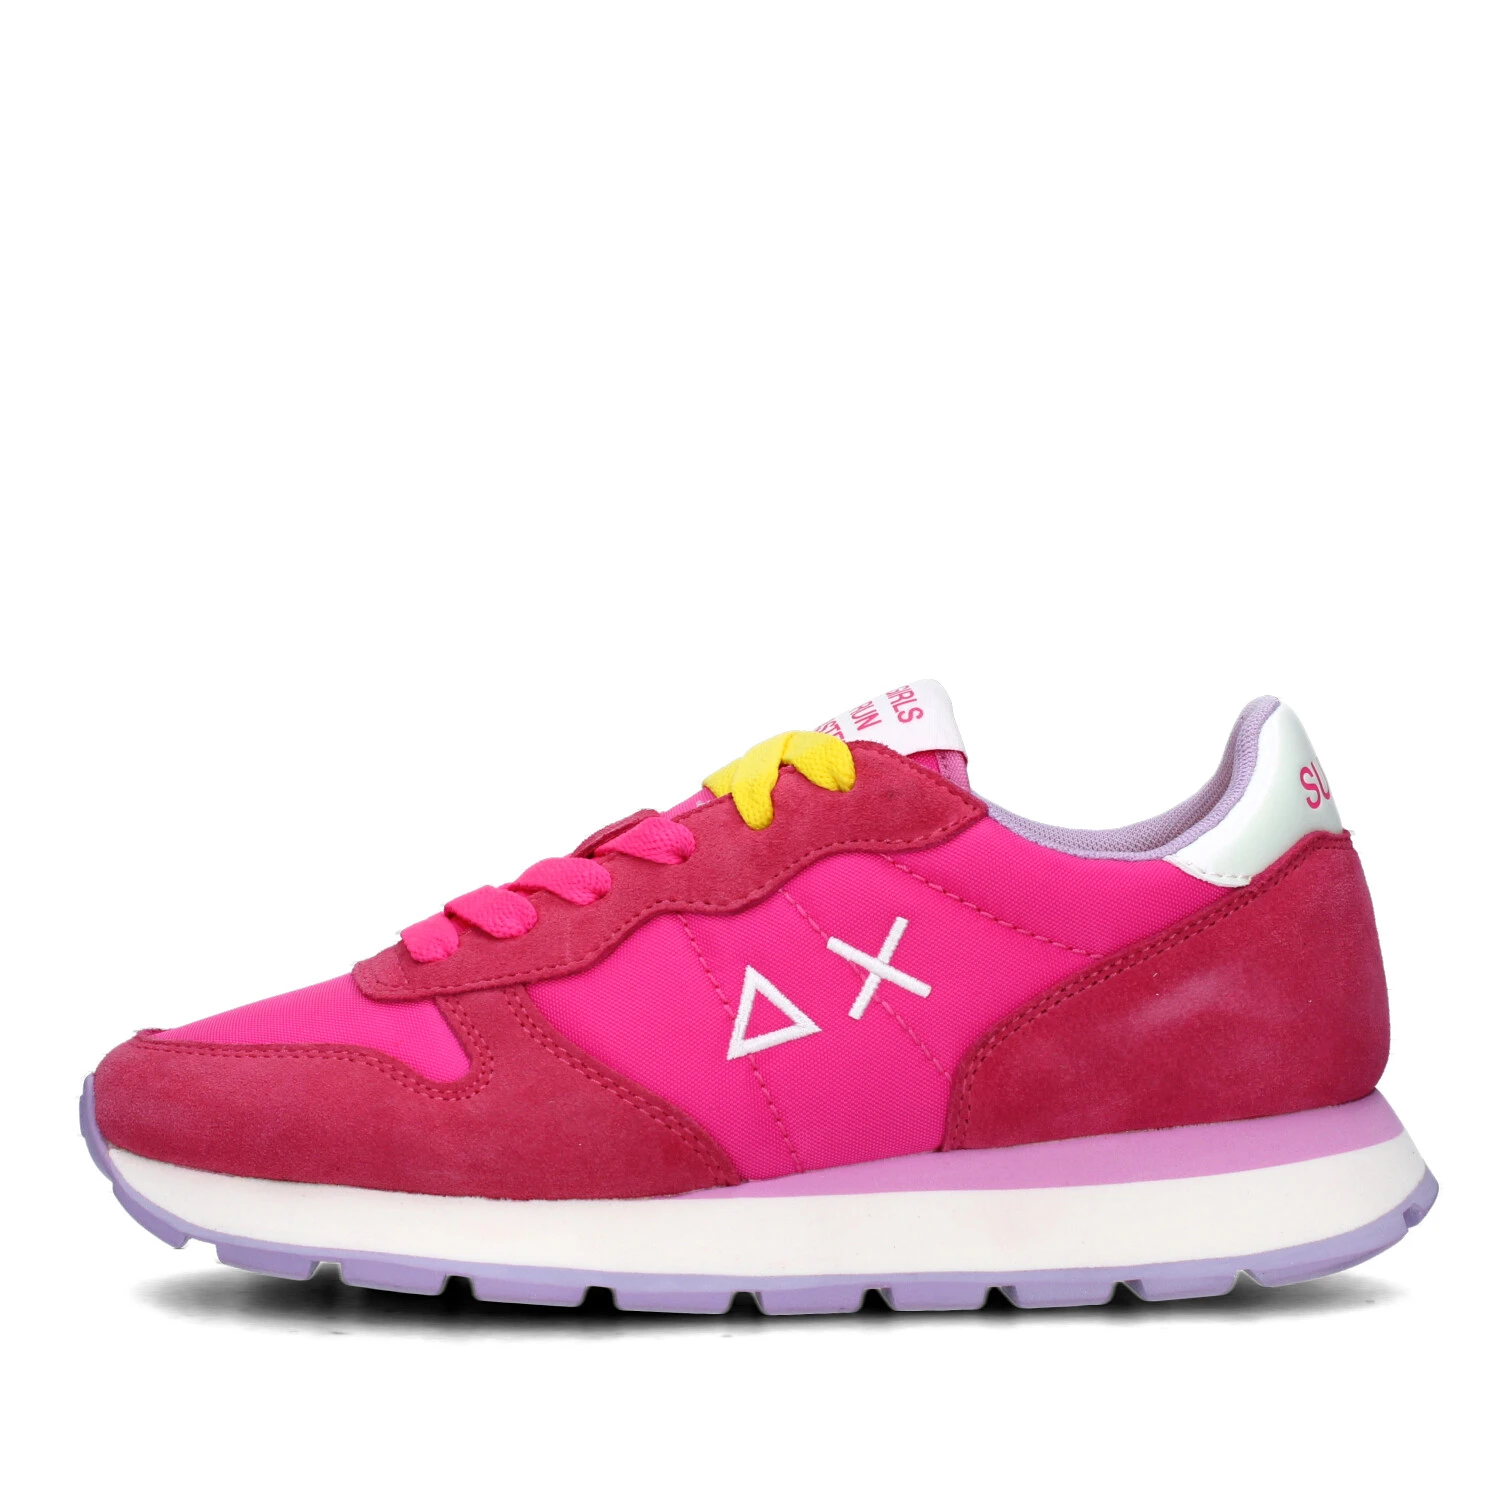 SNEAKERS BASSE ALLY SOLID DONNA FUCSIA